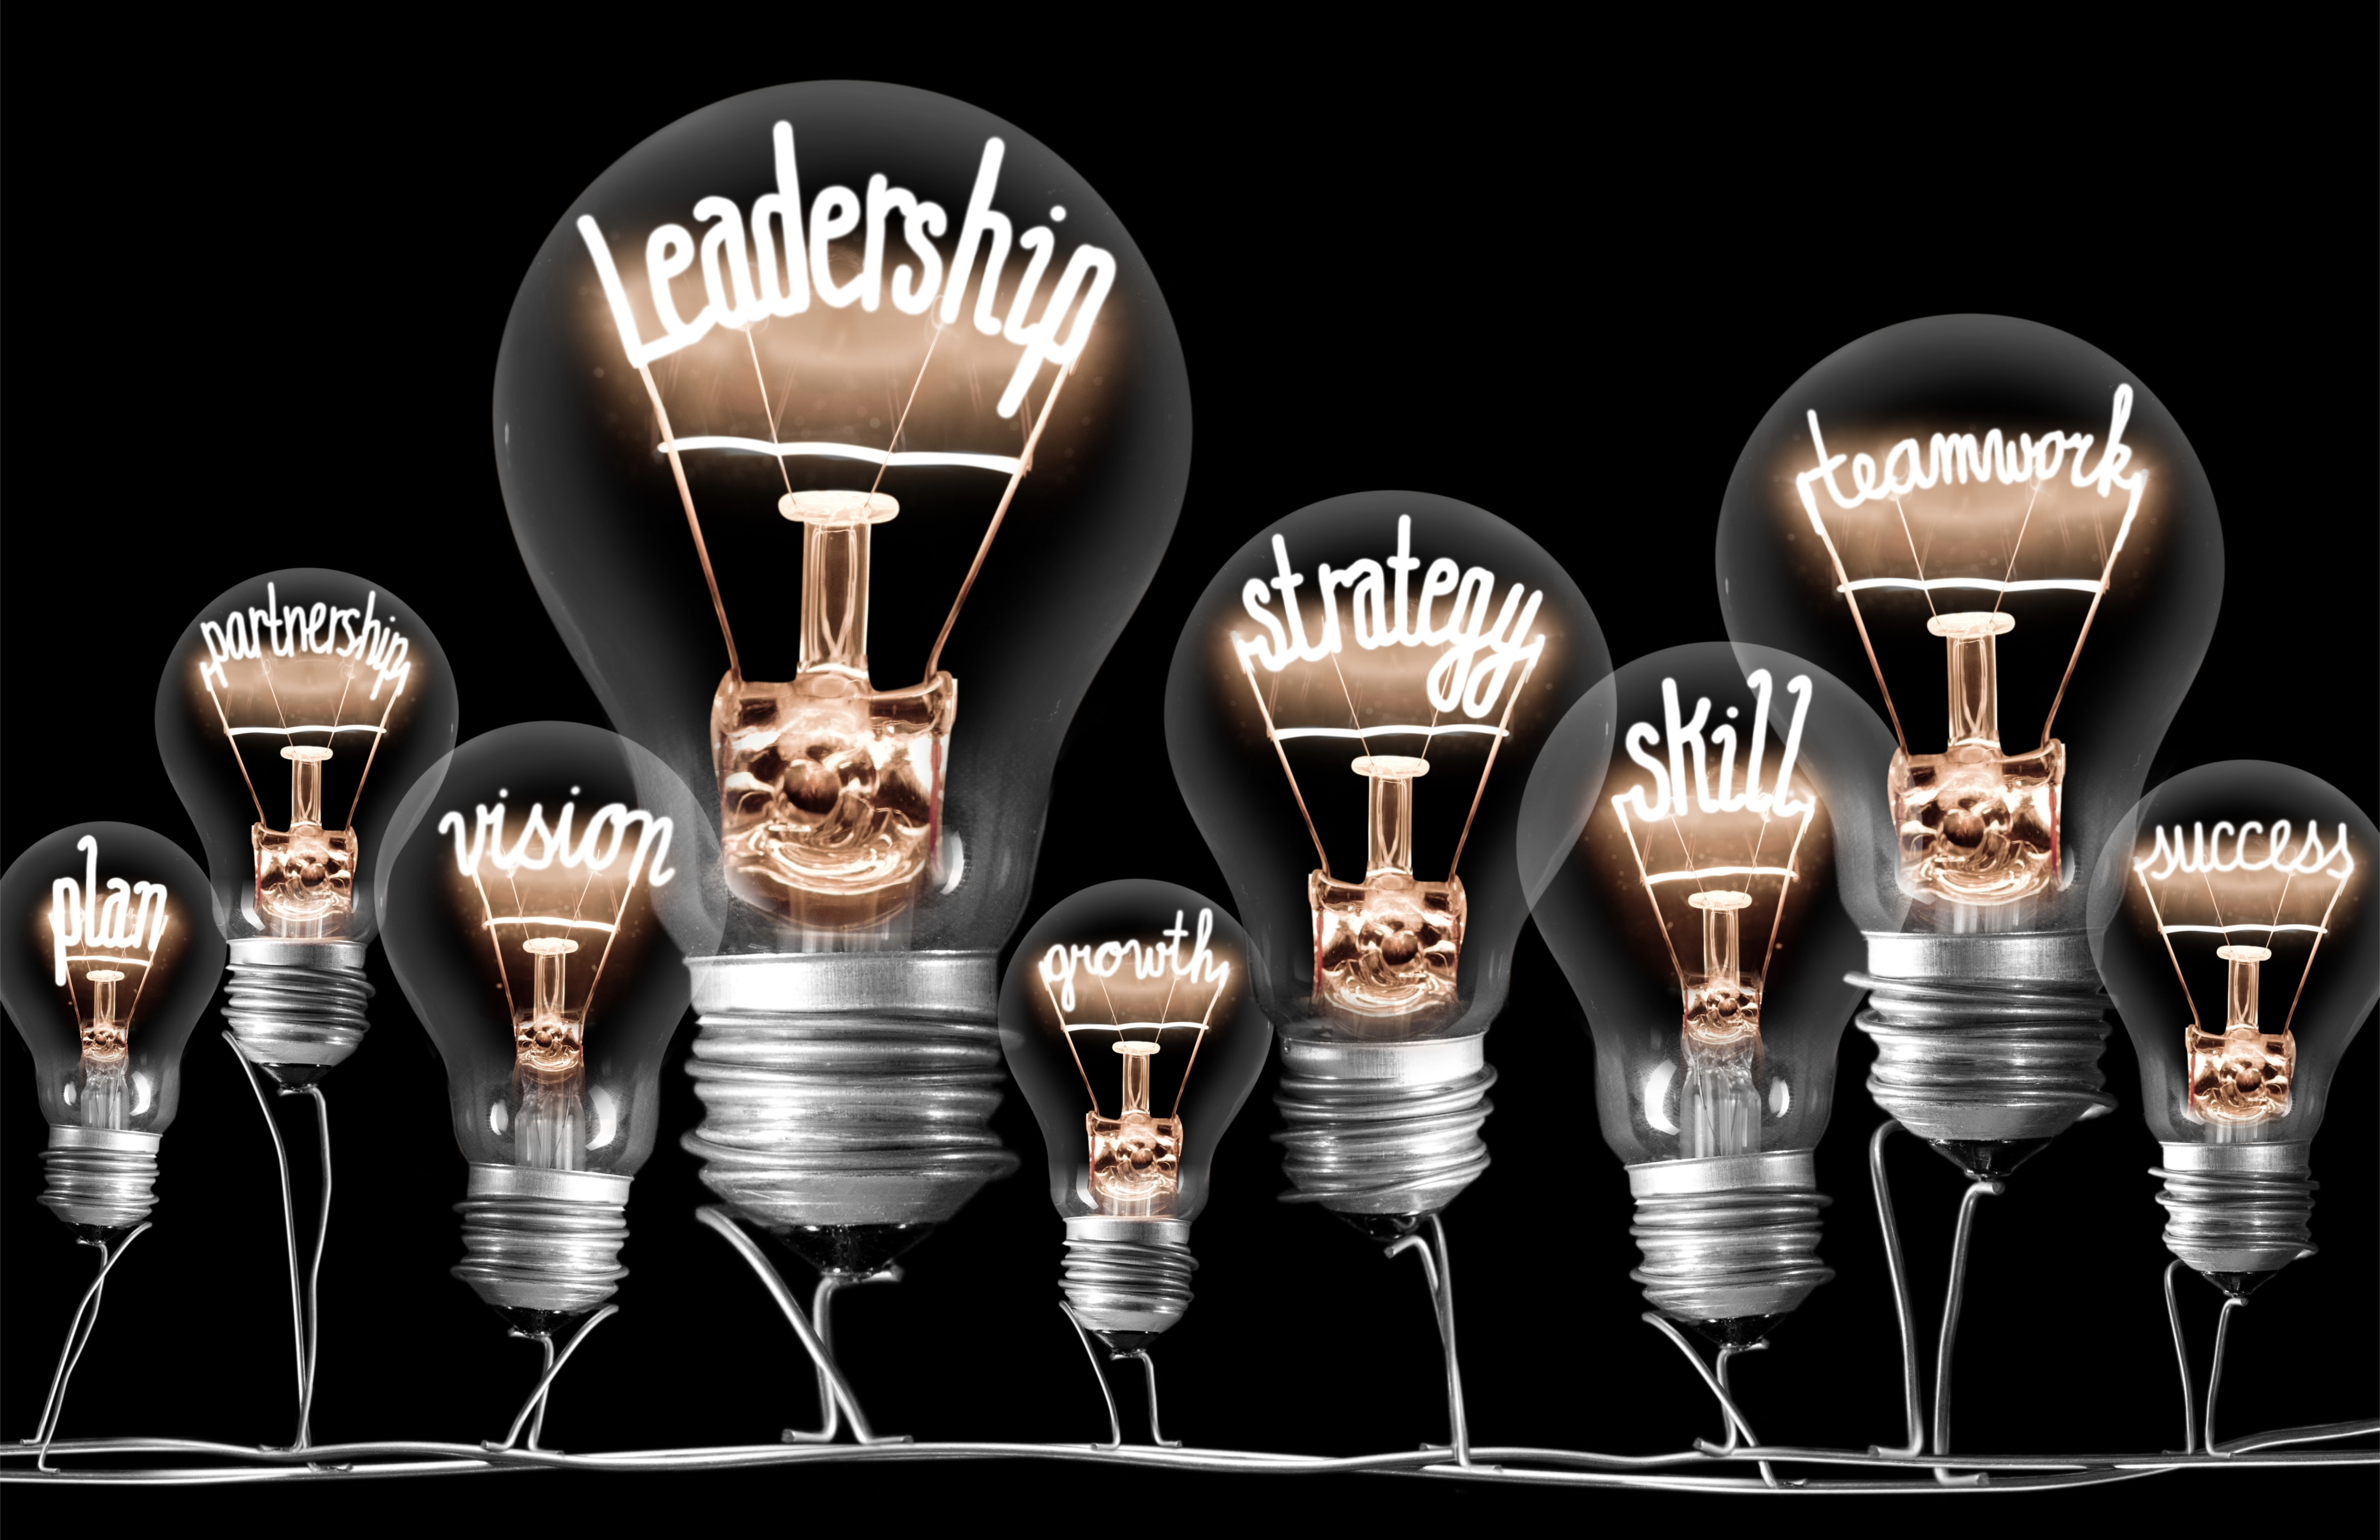 Lightbulbs featuring words related to leadership